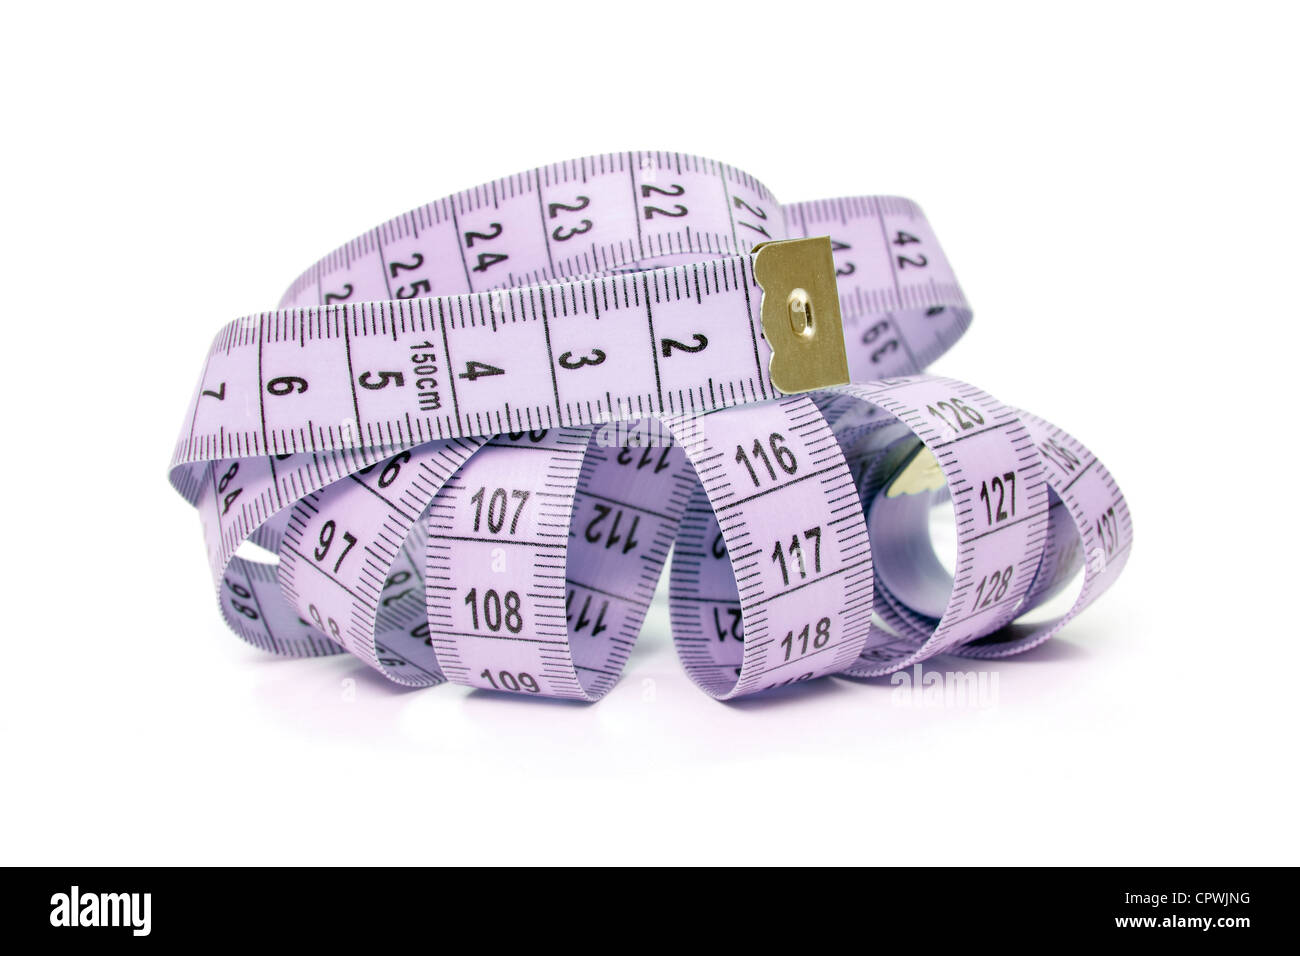 https://c8.alamy.com/comp/CPWJNG/purple-measure-tape-over-a-white-background-CPWJNG.jpg